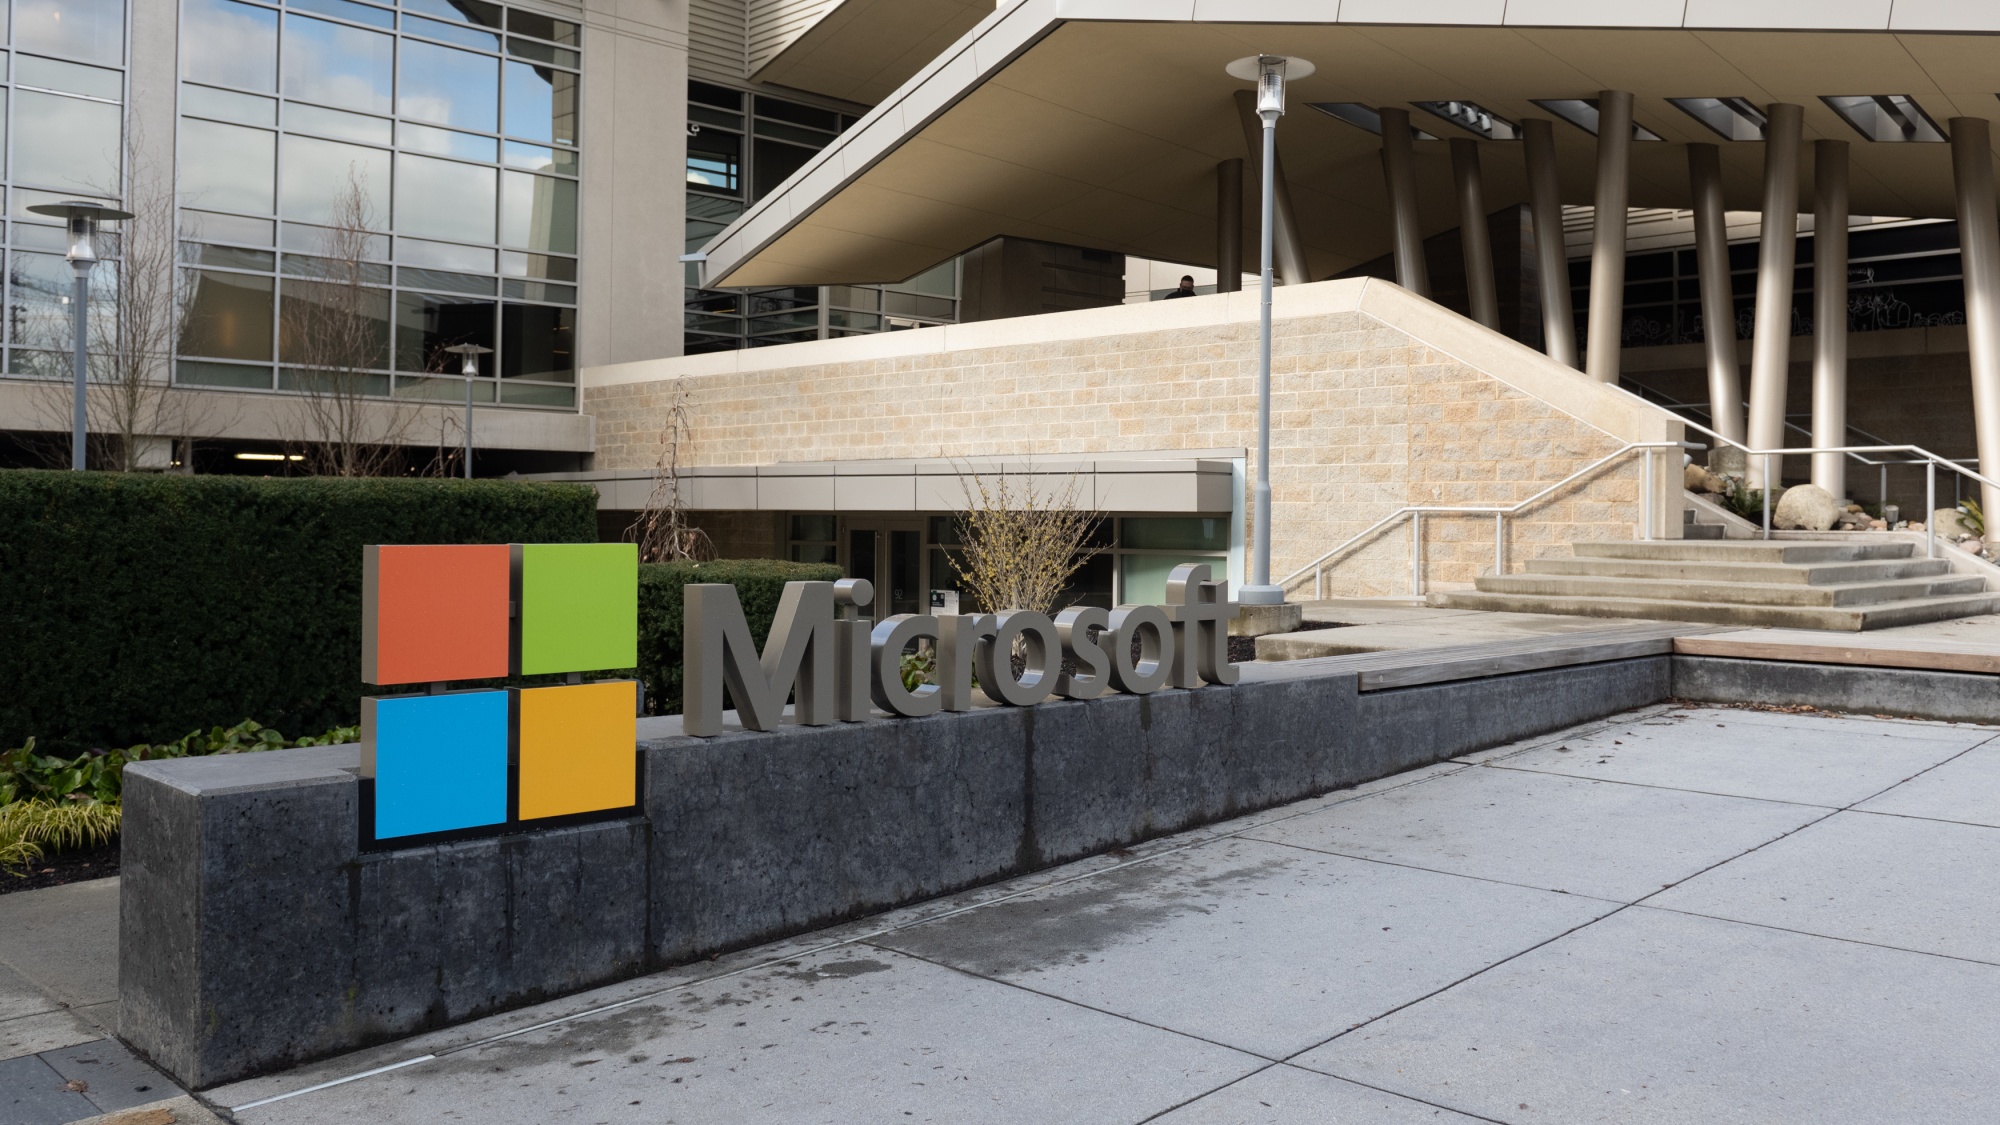 Microsoft is reducing its workforce&nbsp;in HoloLens, Surface and Xbox businesses as part of broad cuts.